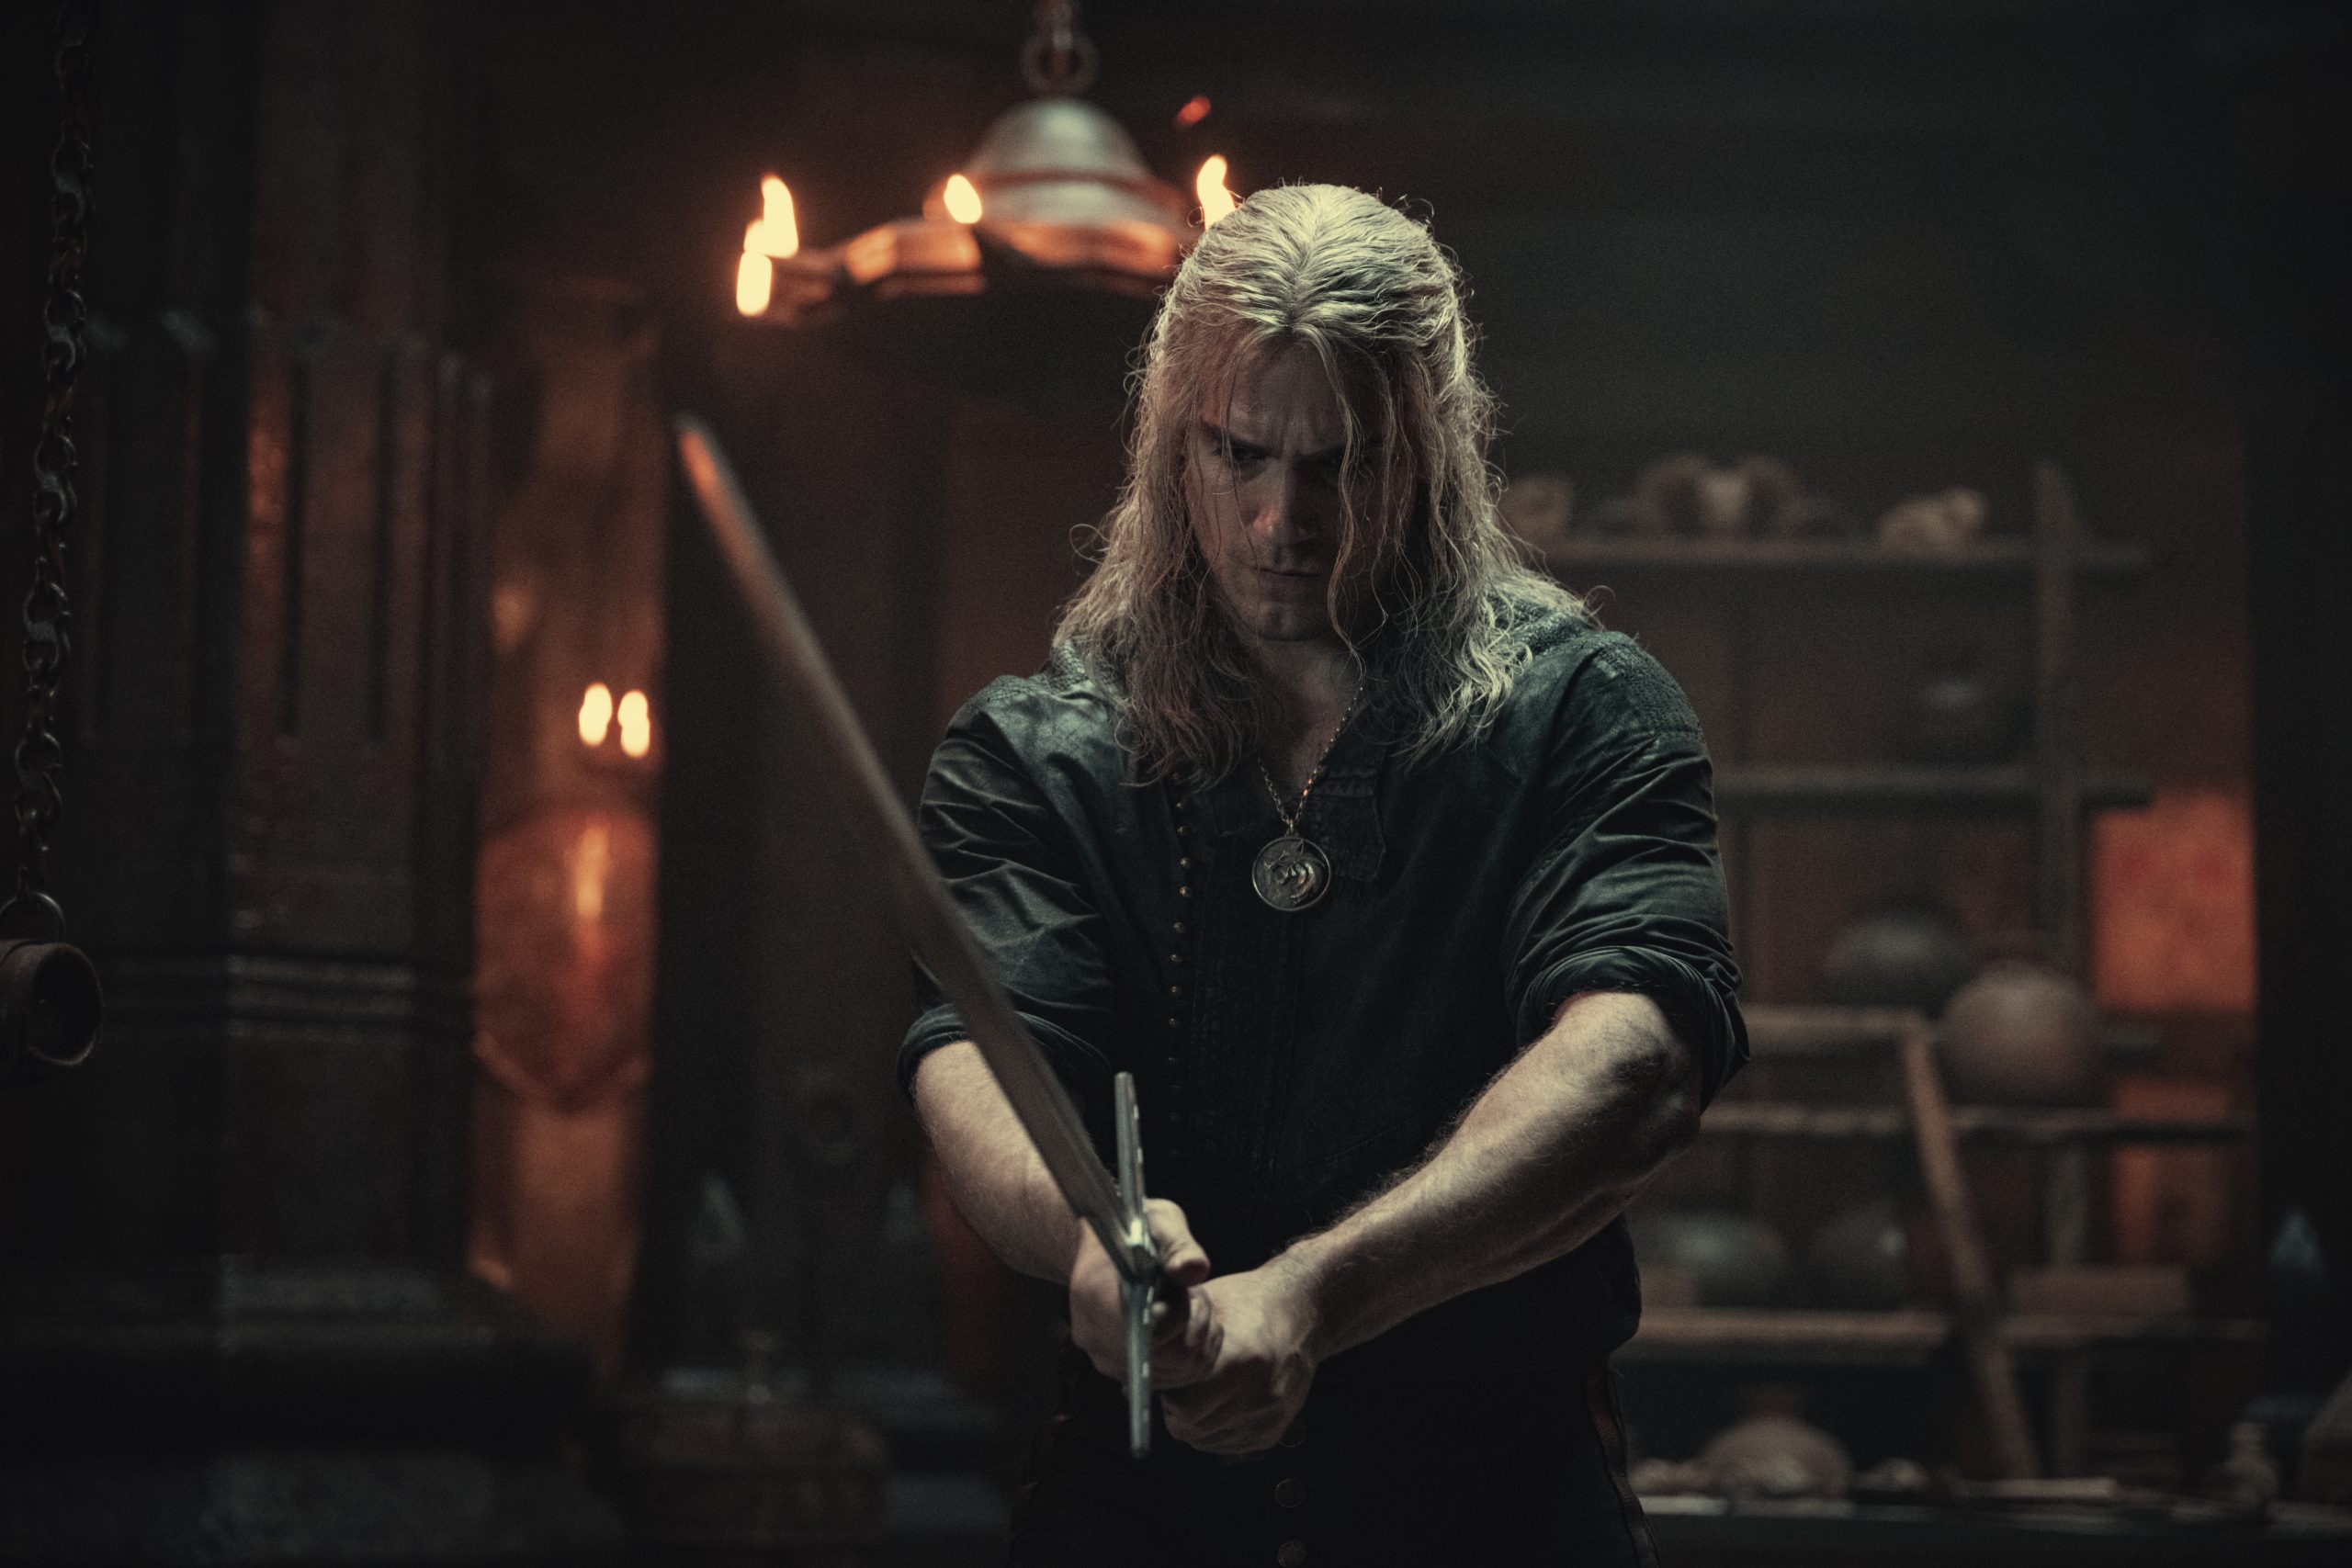 Geralt (Henry Cavill) takes up his blade in The Witcher Season 2 Episode 5 “Turn Your Back” (2021) via Netflix